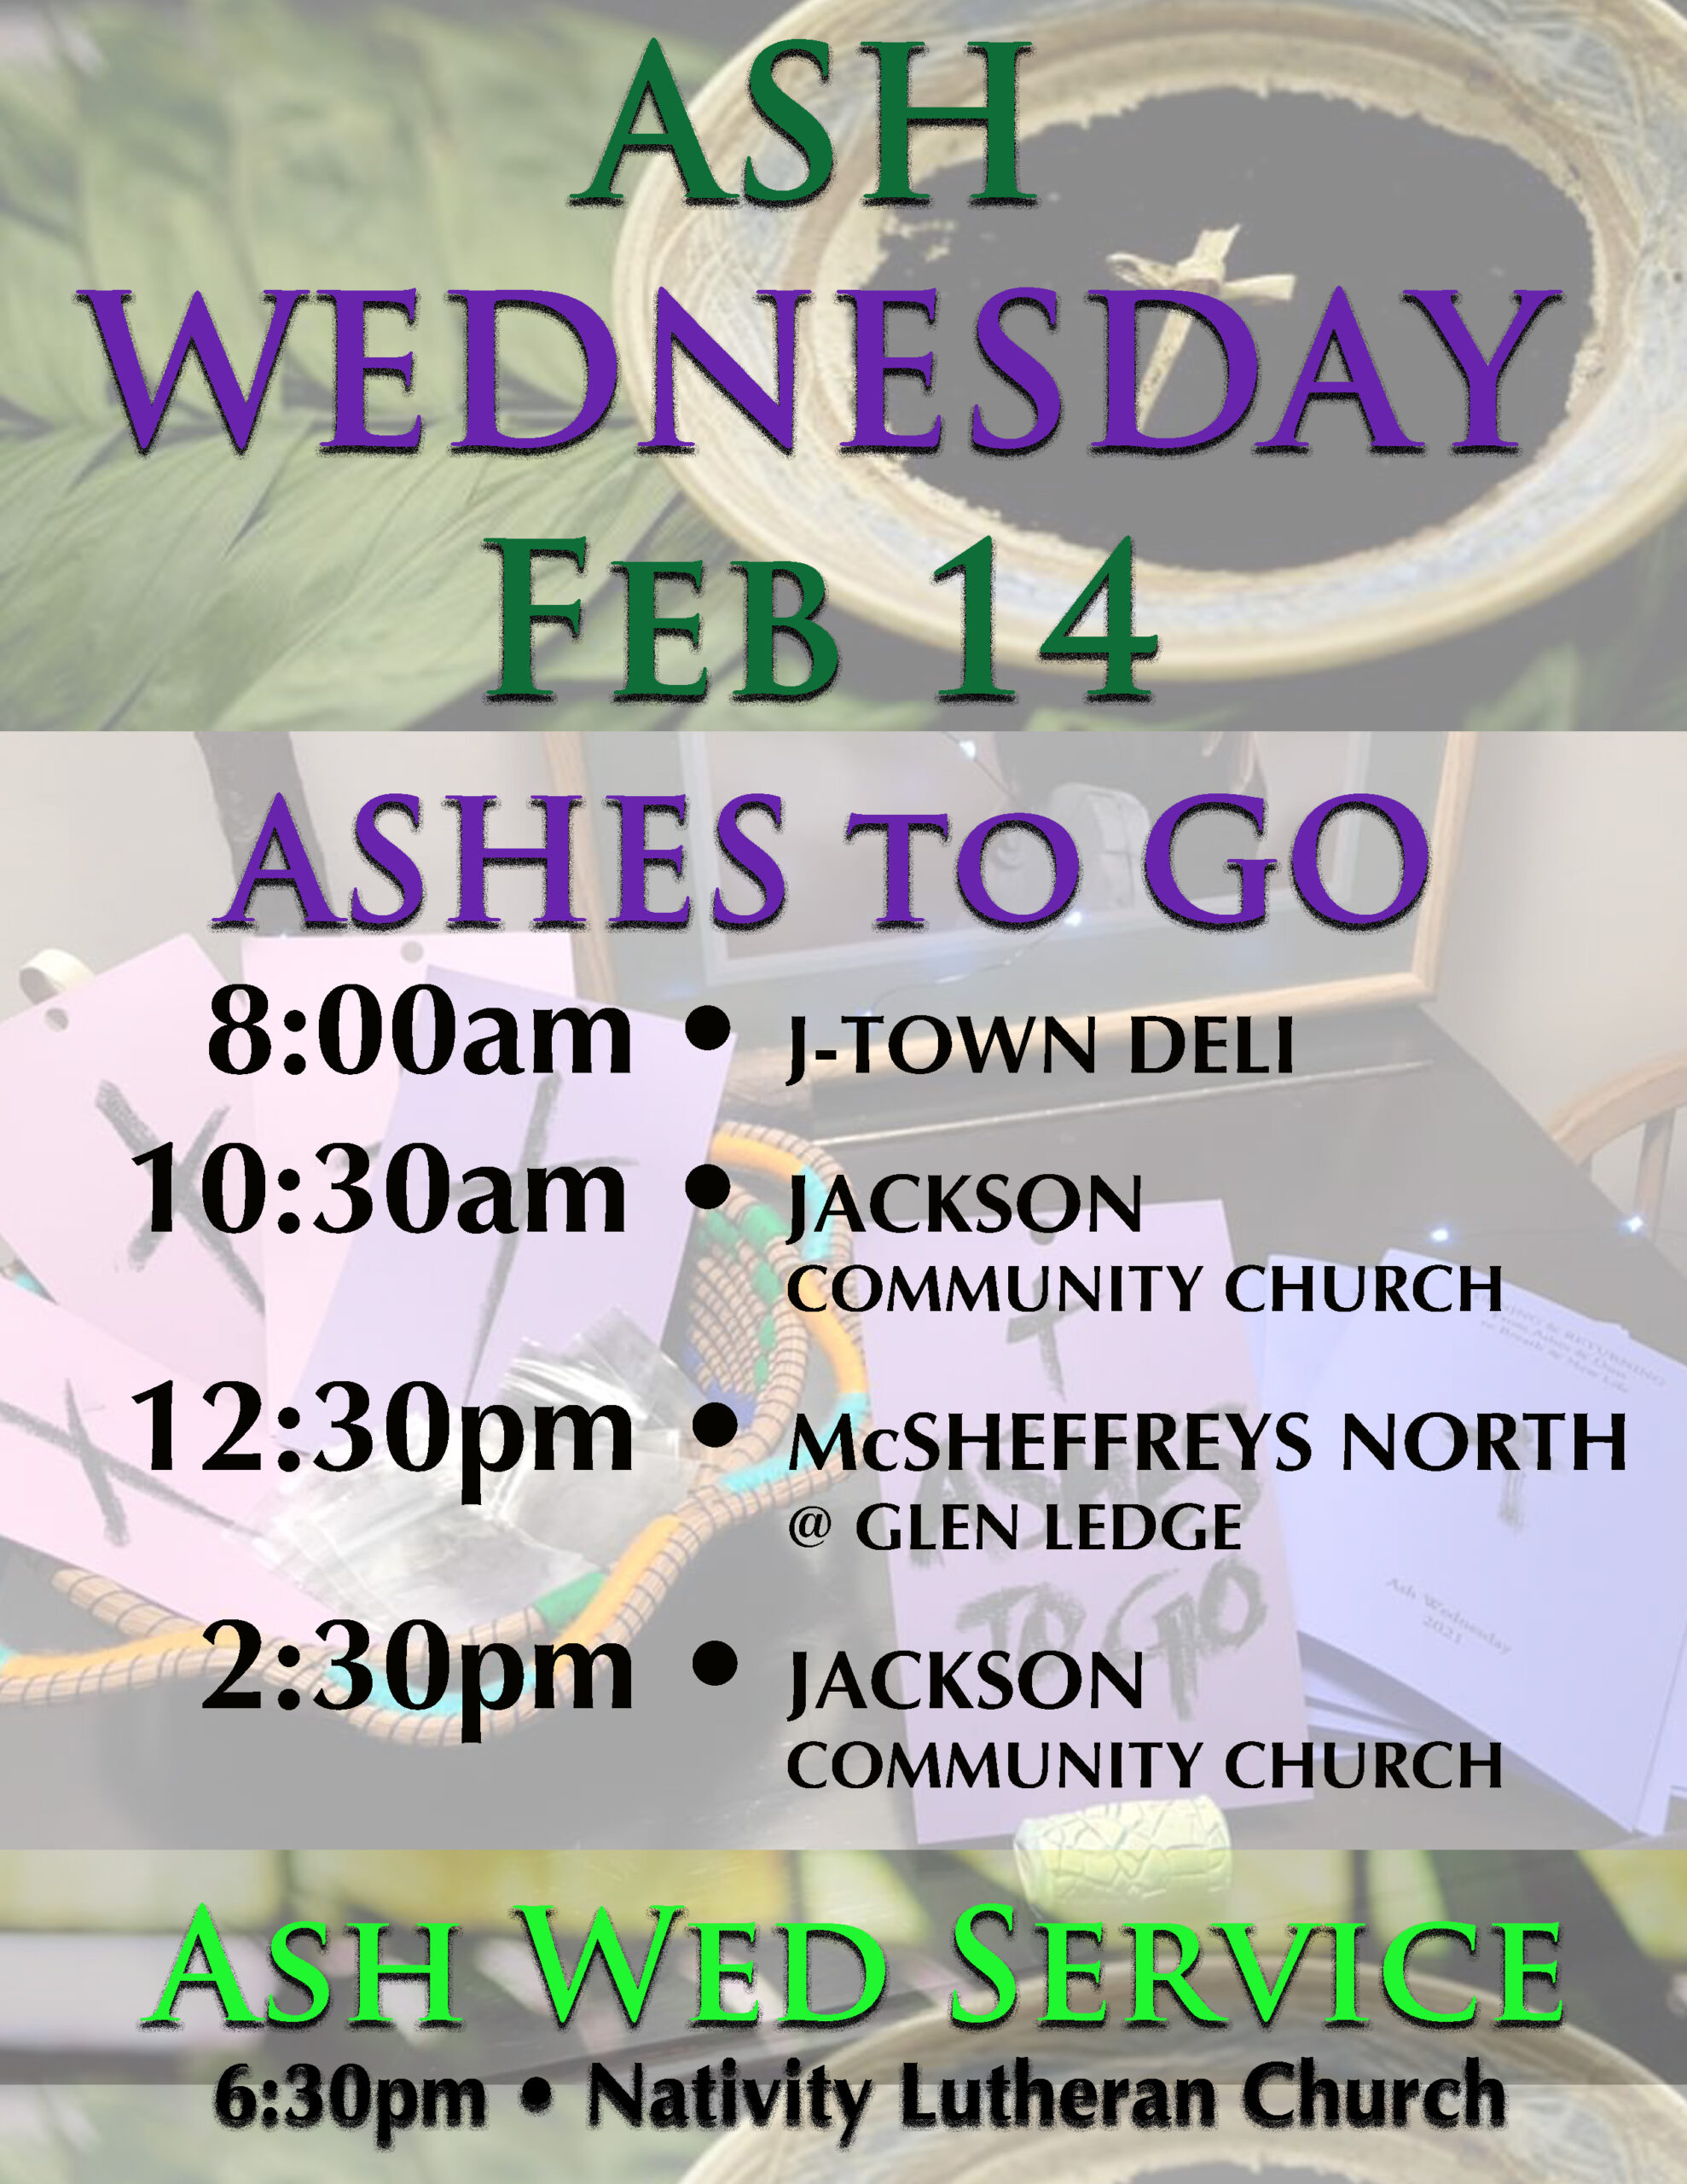 ASH WEDNESDAY: Ashes to Go in Jackson & Glen (Wed, Feb 14)